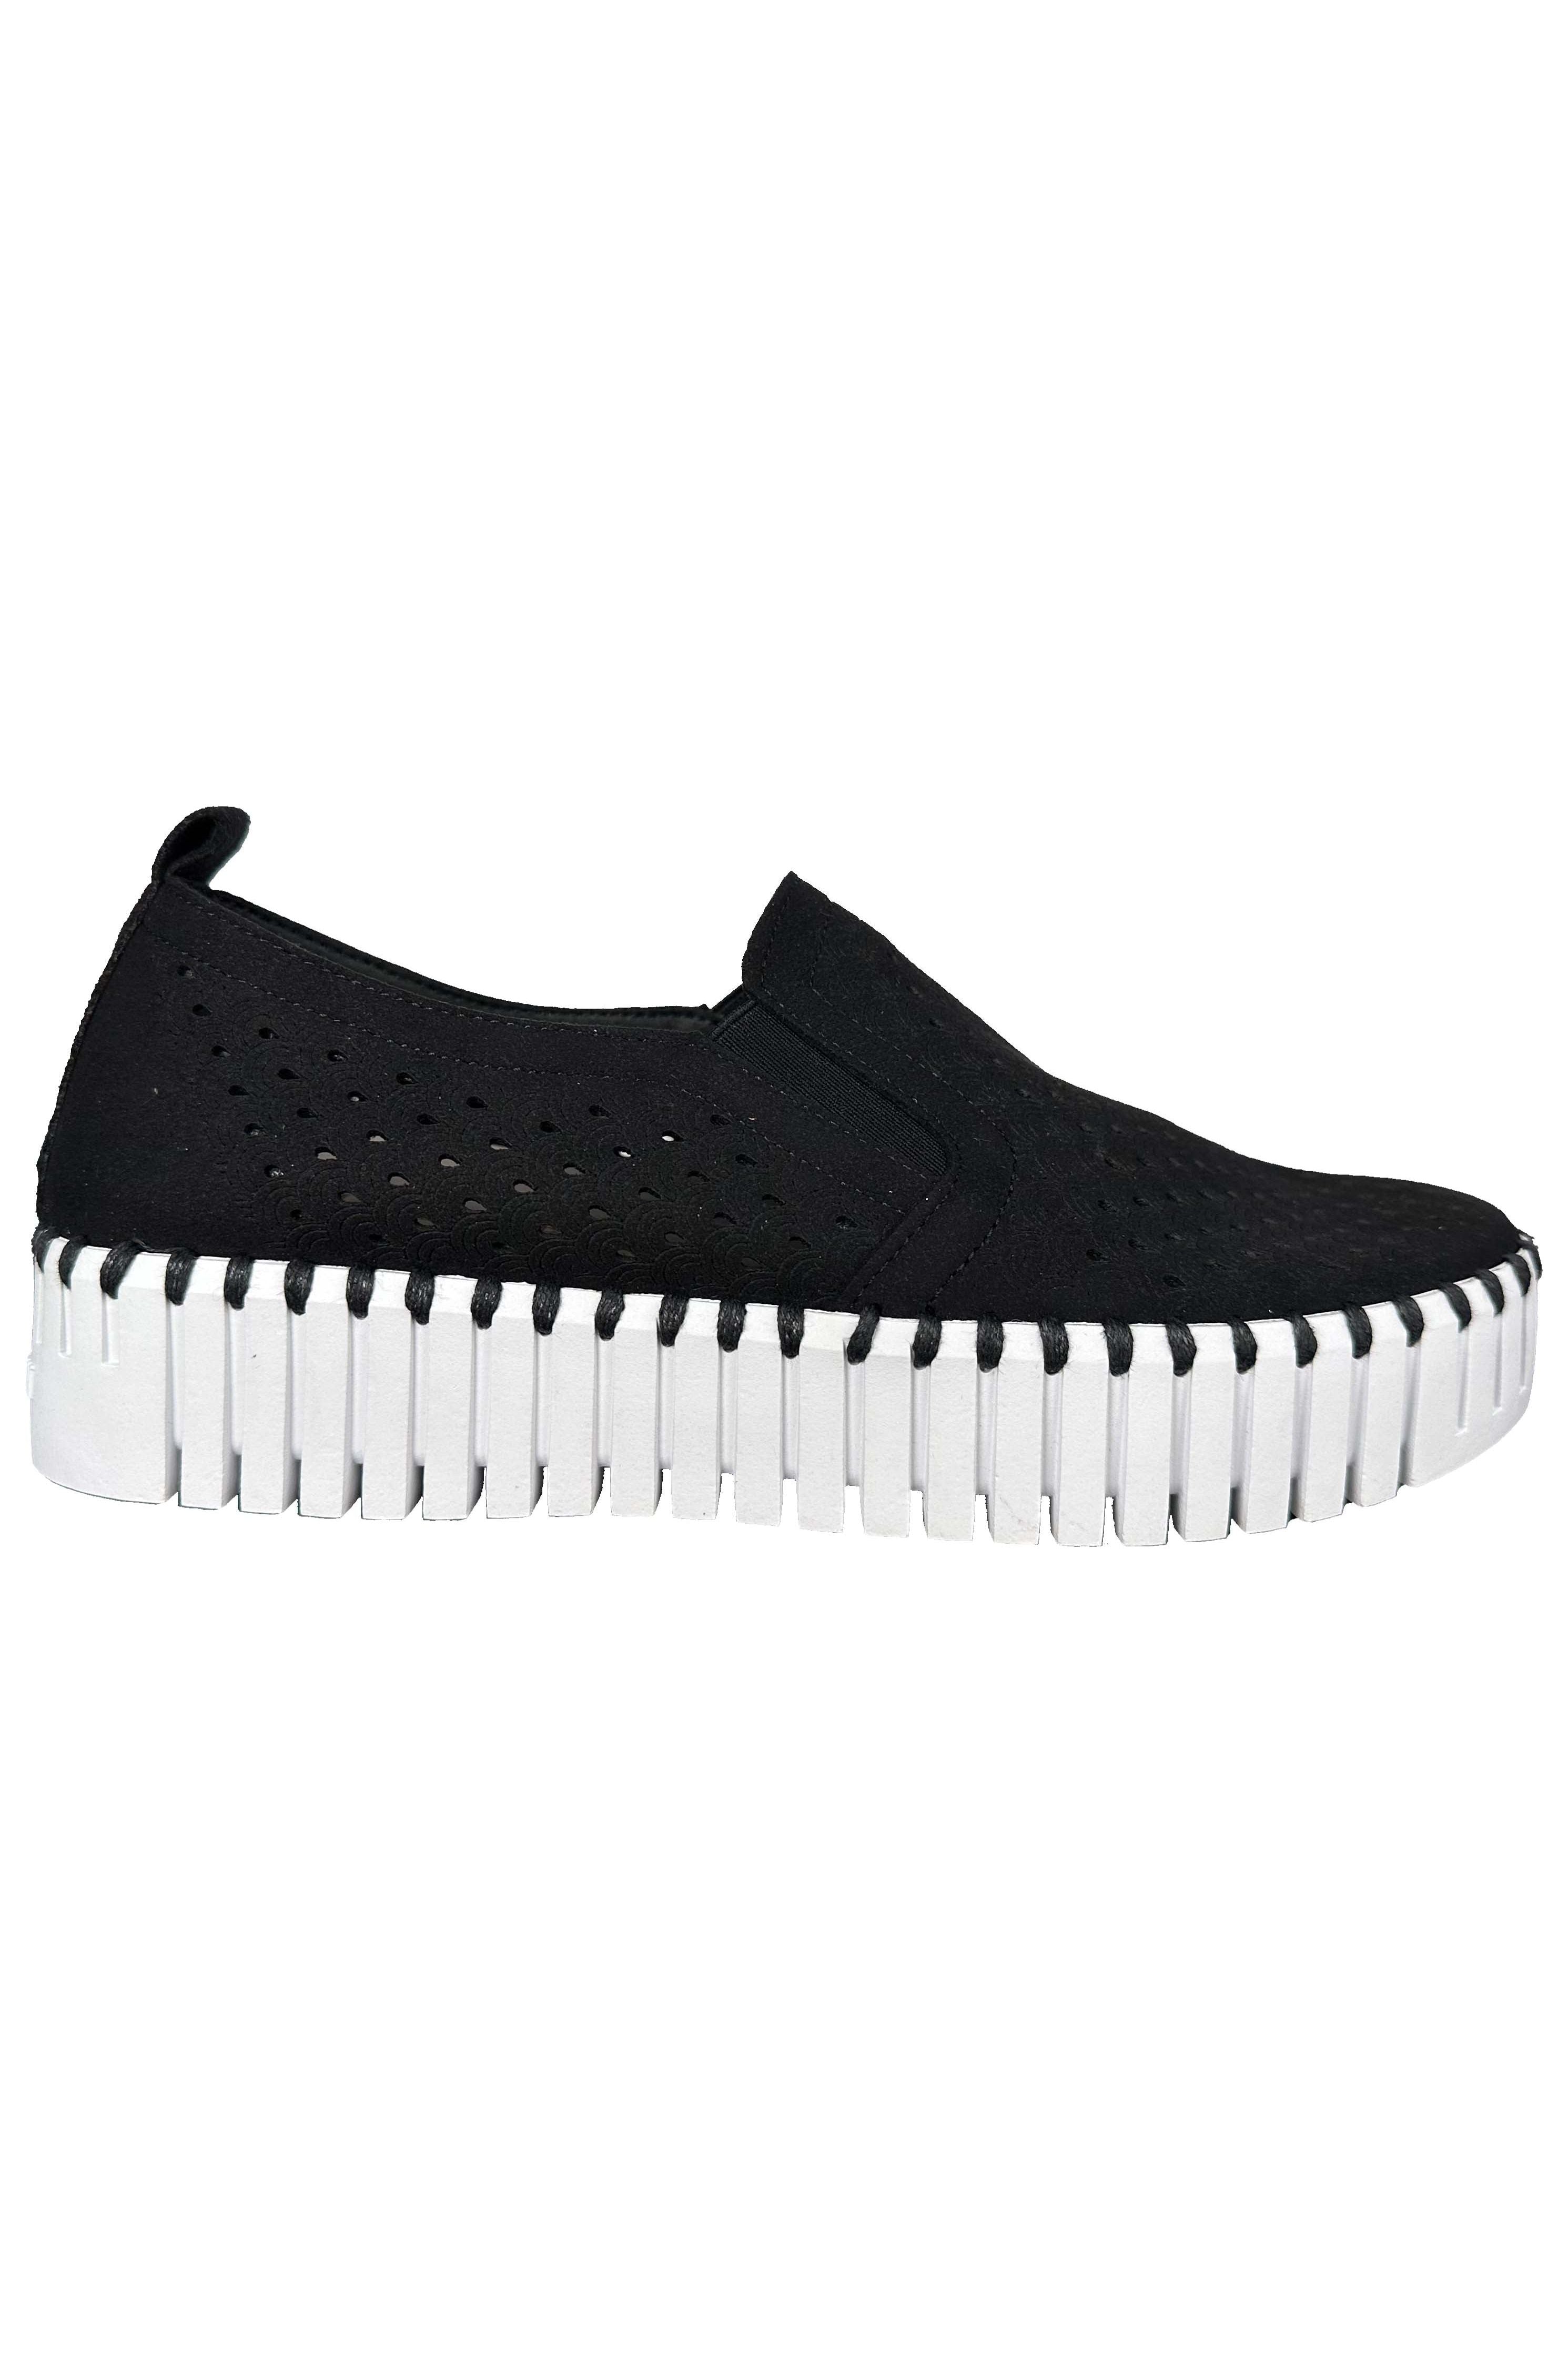 Top Quality TIME OUT Sneakers Fashion Platform Shoes Perforated